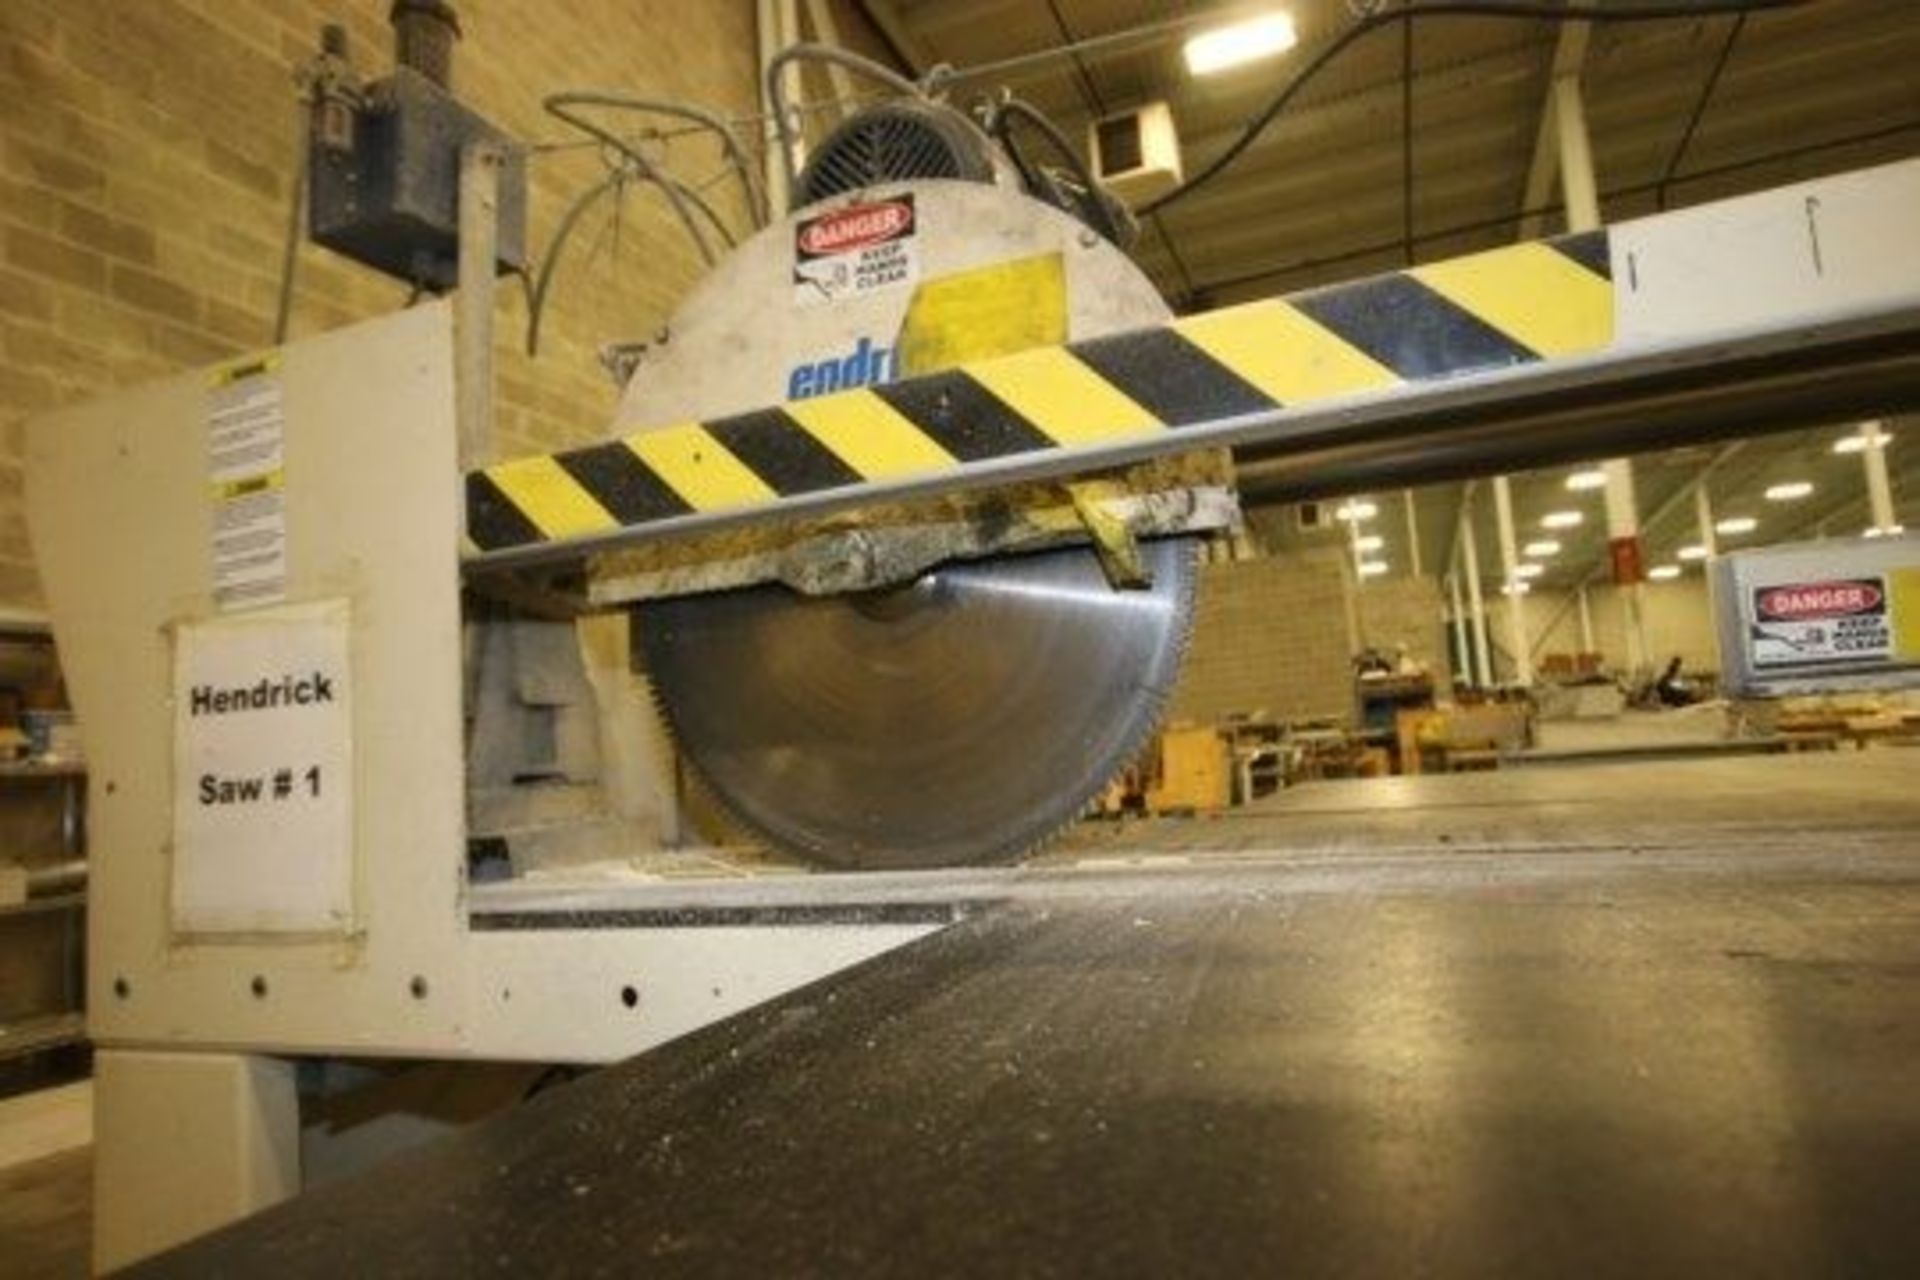 Hendrick 22" Dia. Cross Cut Saw, M/N HS 150, with Laser Assist, Aprox. 90" W Cutting Area, with - Image 5 of 6